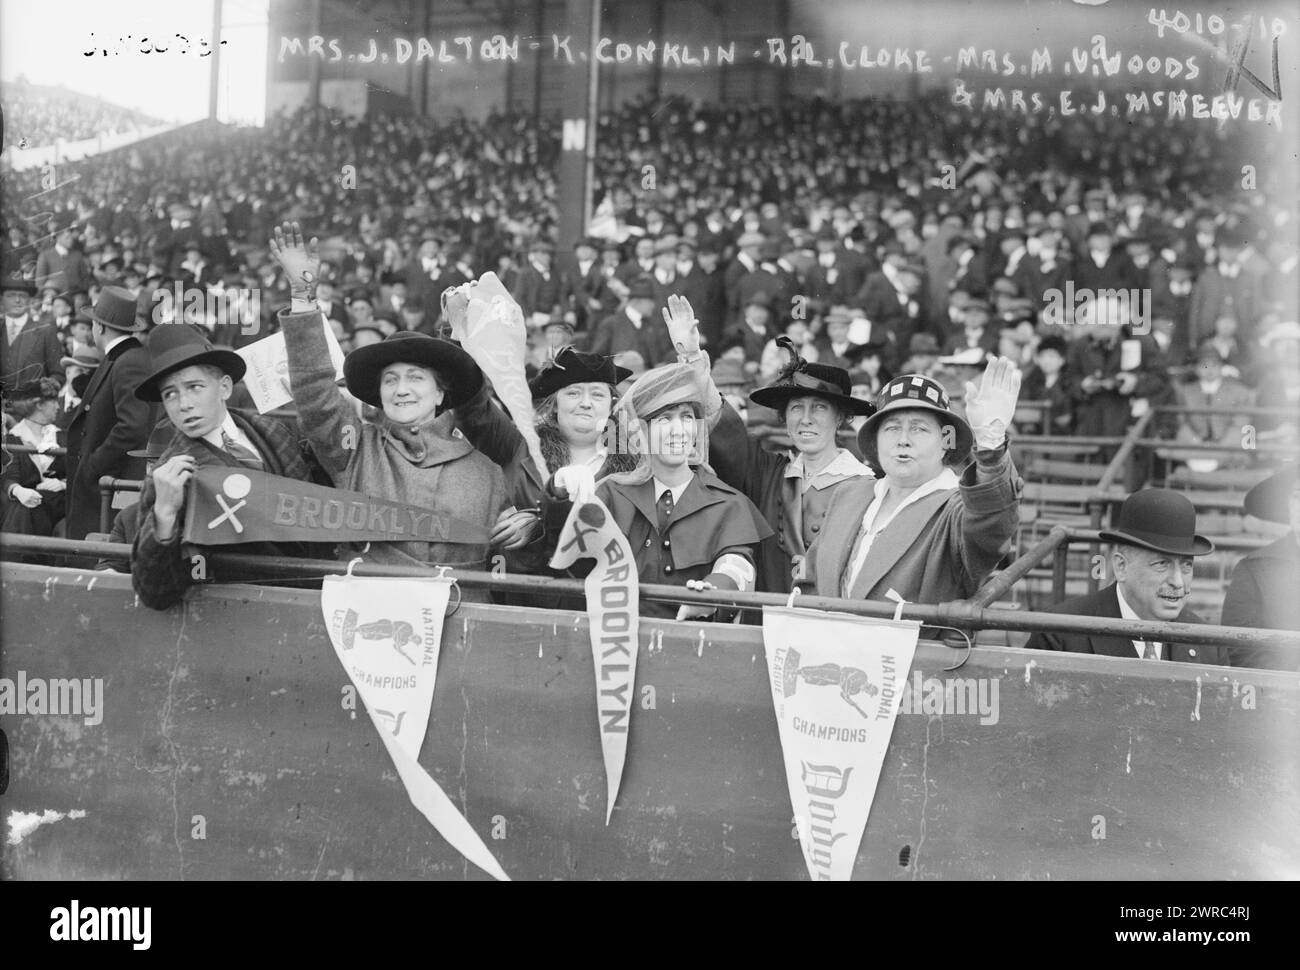 J. Woods, Mrs. J. Dalton, K. Conklin, R.L. Cloke, Mrs. M.V. Woods, Mrs. E.J. McKeever, Photograph shows Brooklyn baseball fans at the 1916 World Series seated with Jennie Veronica Murphy McKeever (1862-1942), wife of one of the Brooklyn team's owners., 1916, Glass negatives, 1 negative: glass Stock Photo